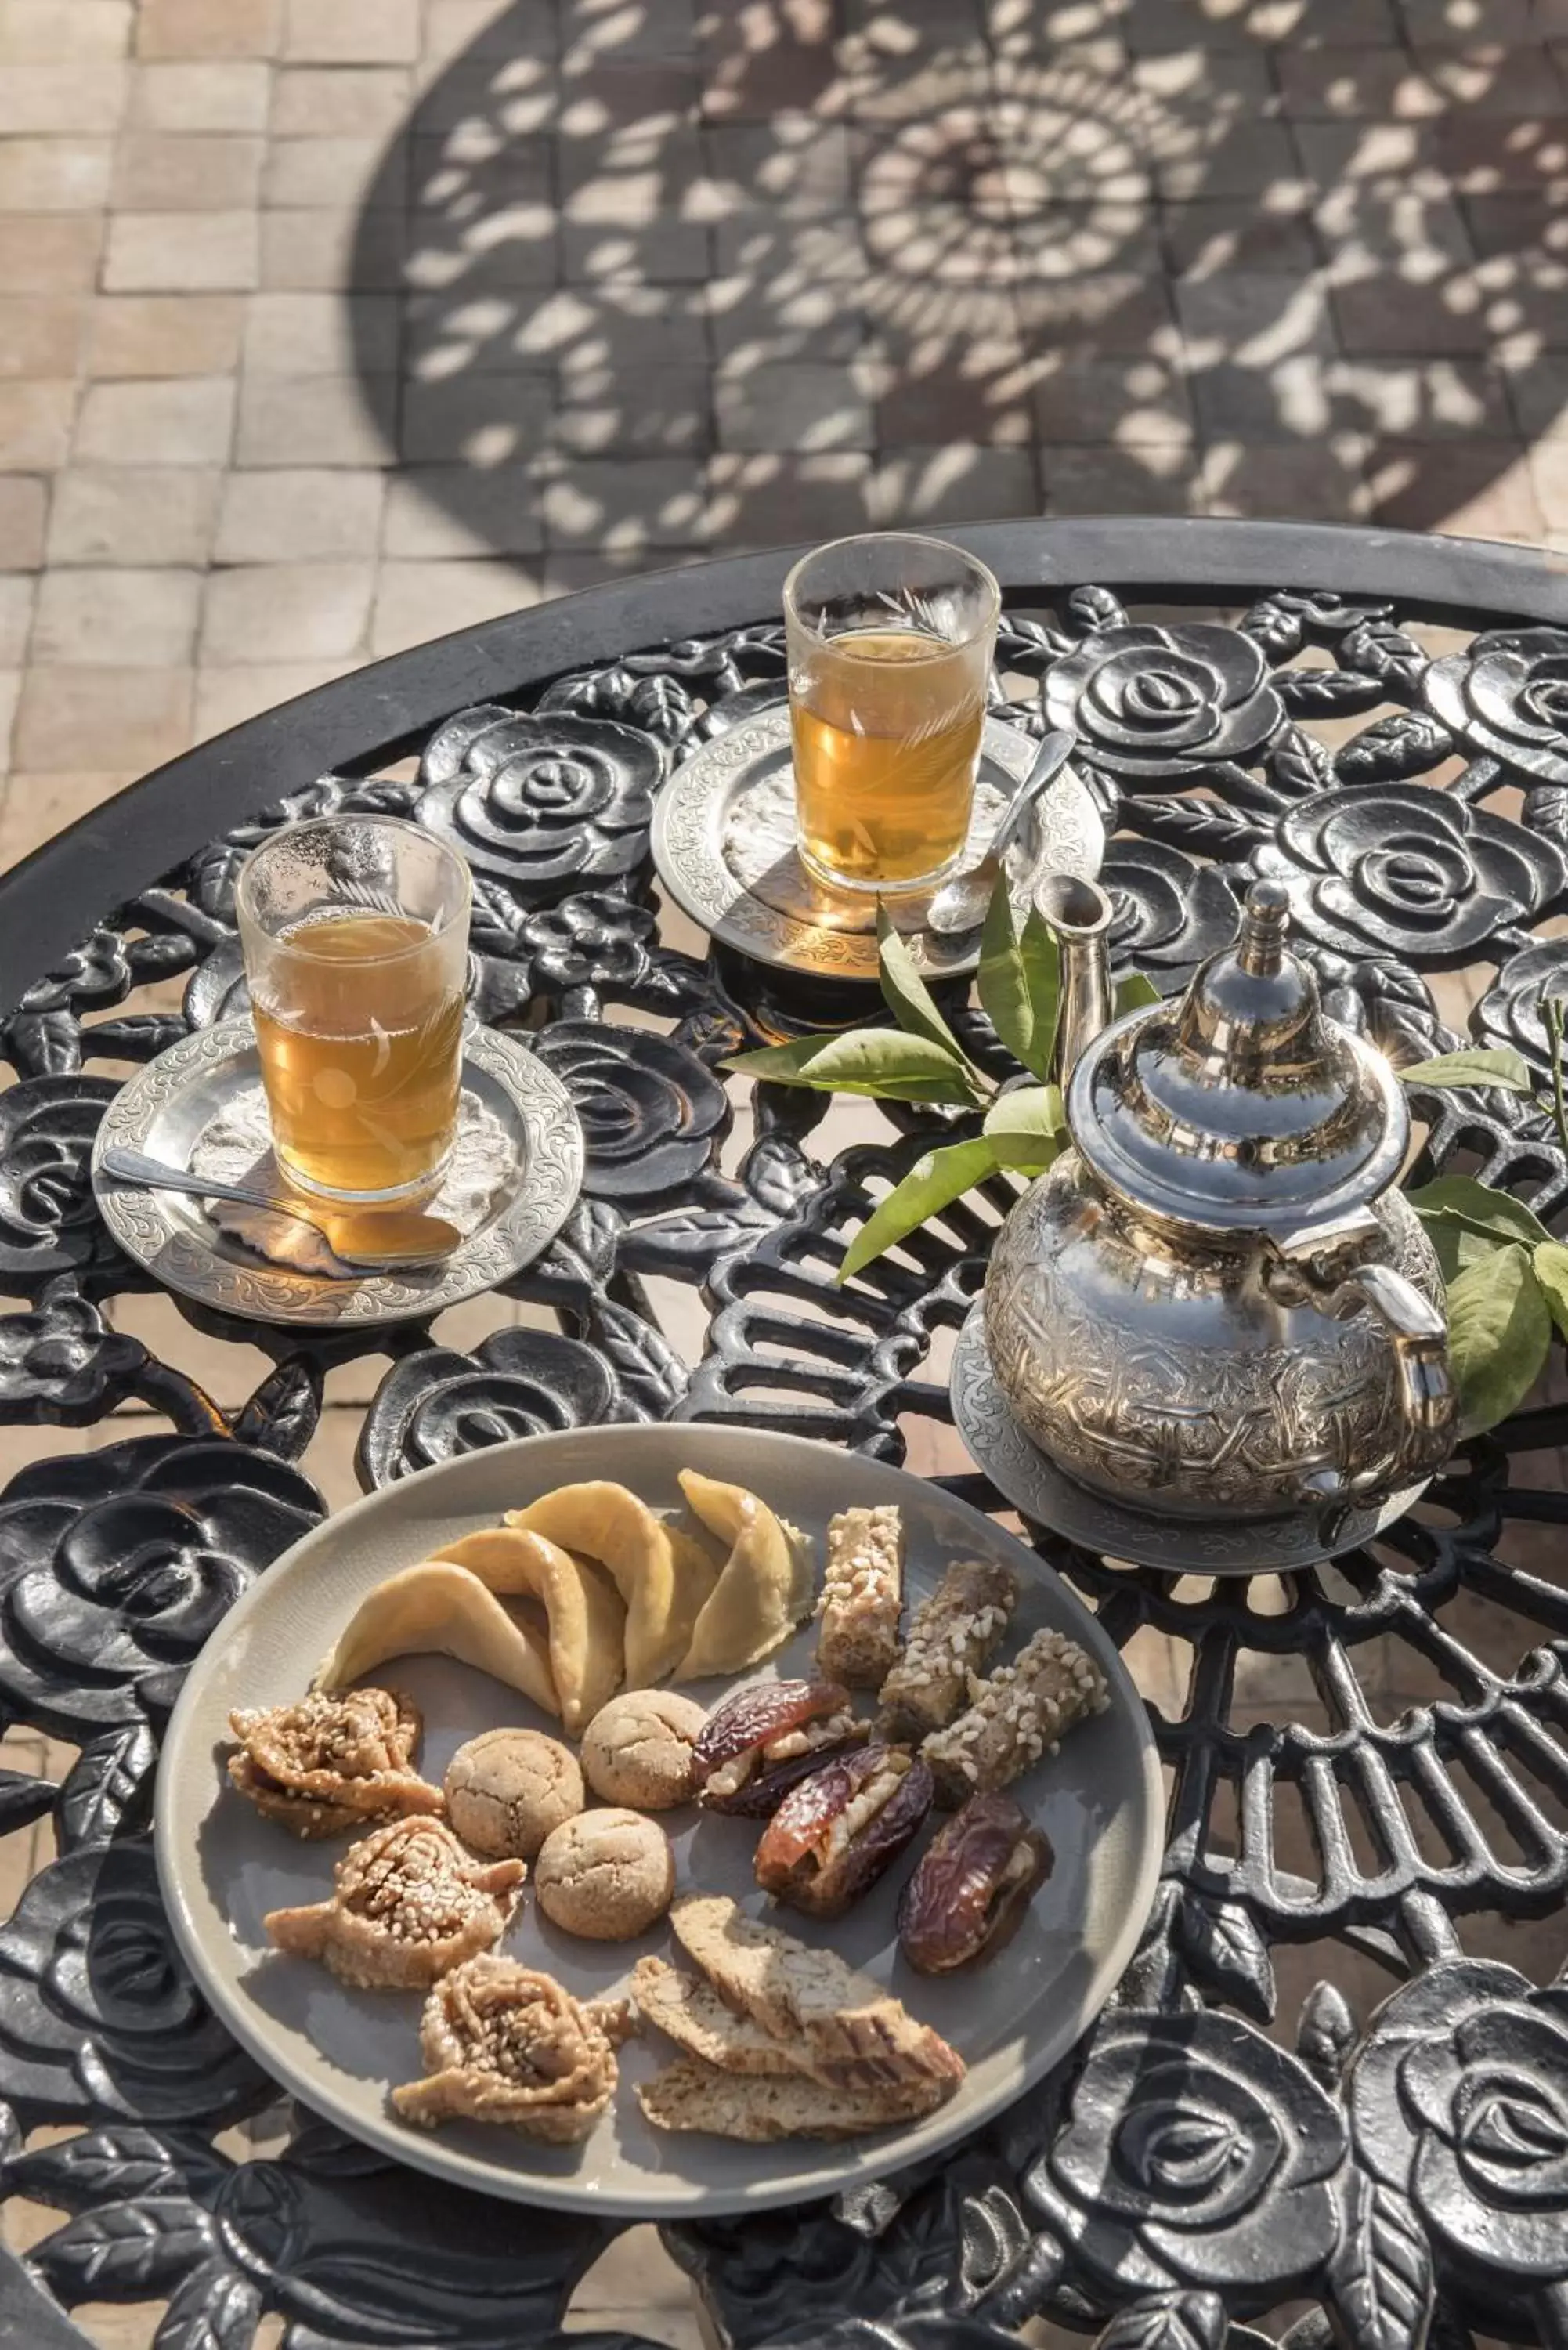 Food and drinks in La Sultana Marrakech